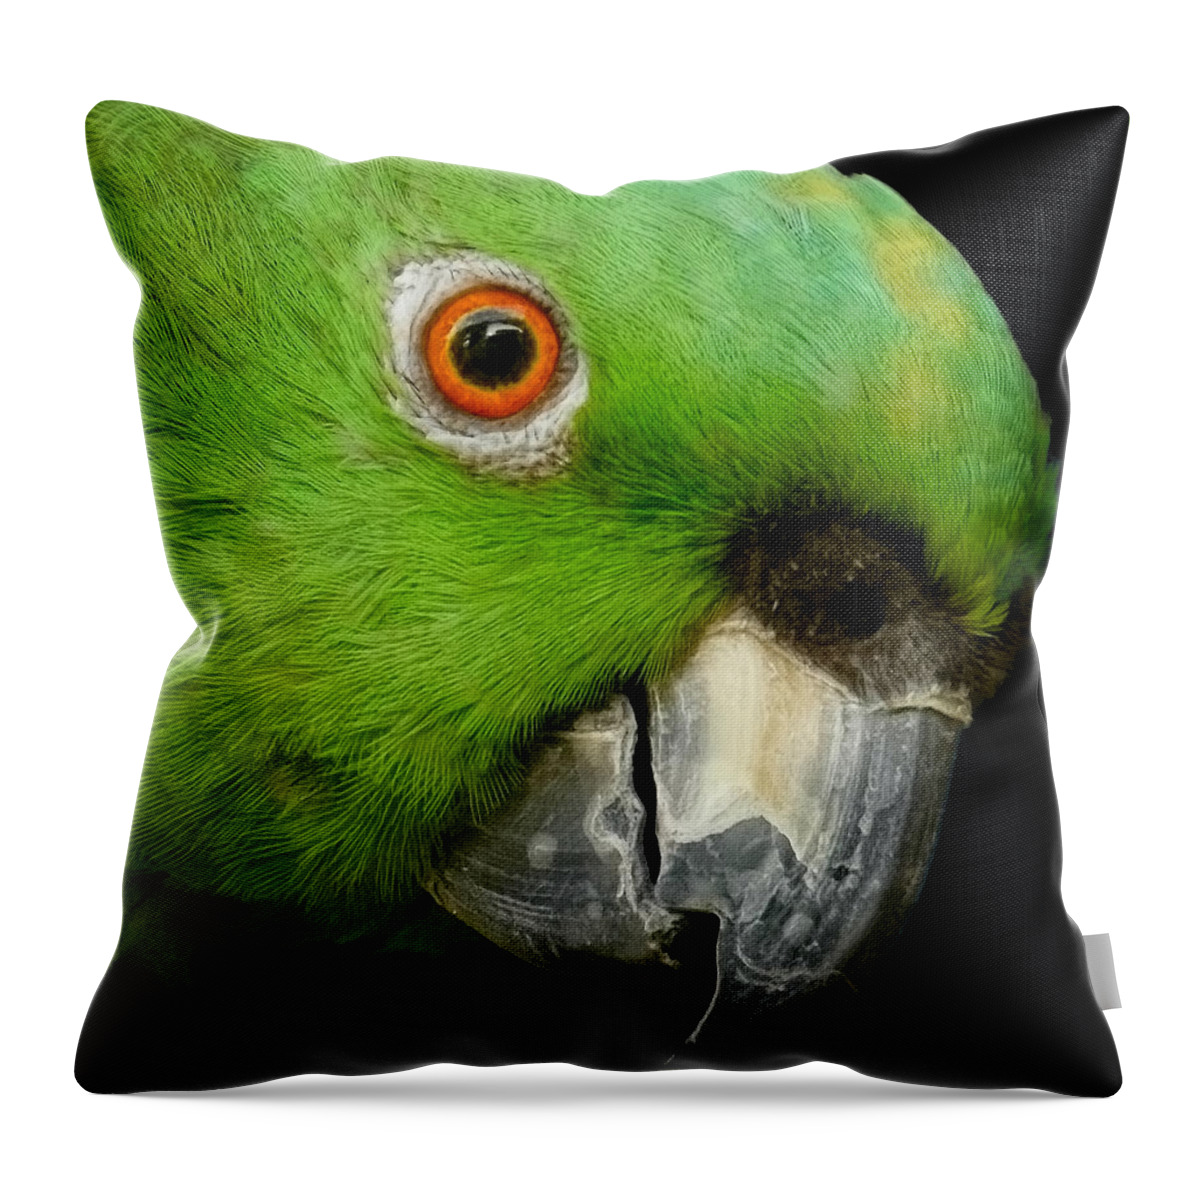 Parrot Throw Pillow featuring the photograph I See You by Joe Bonita